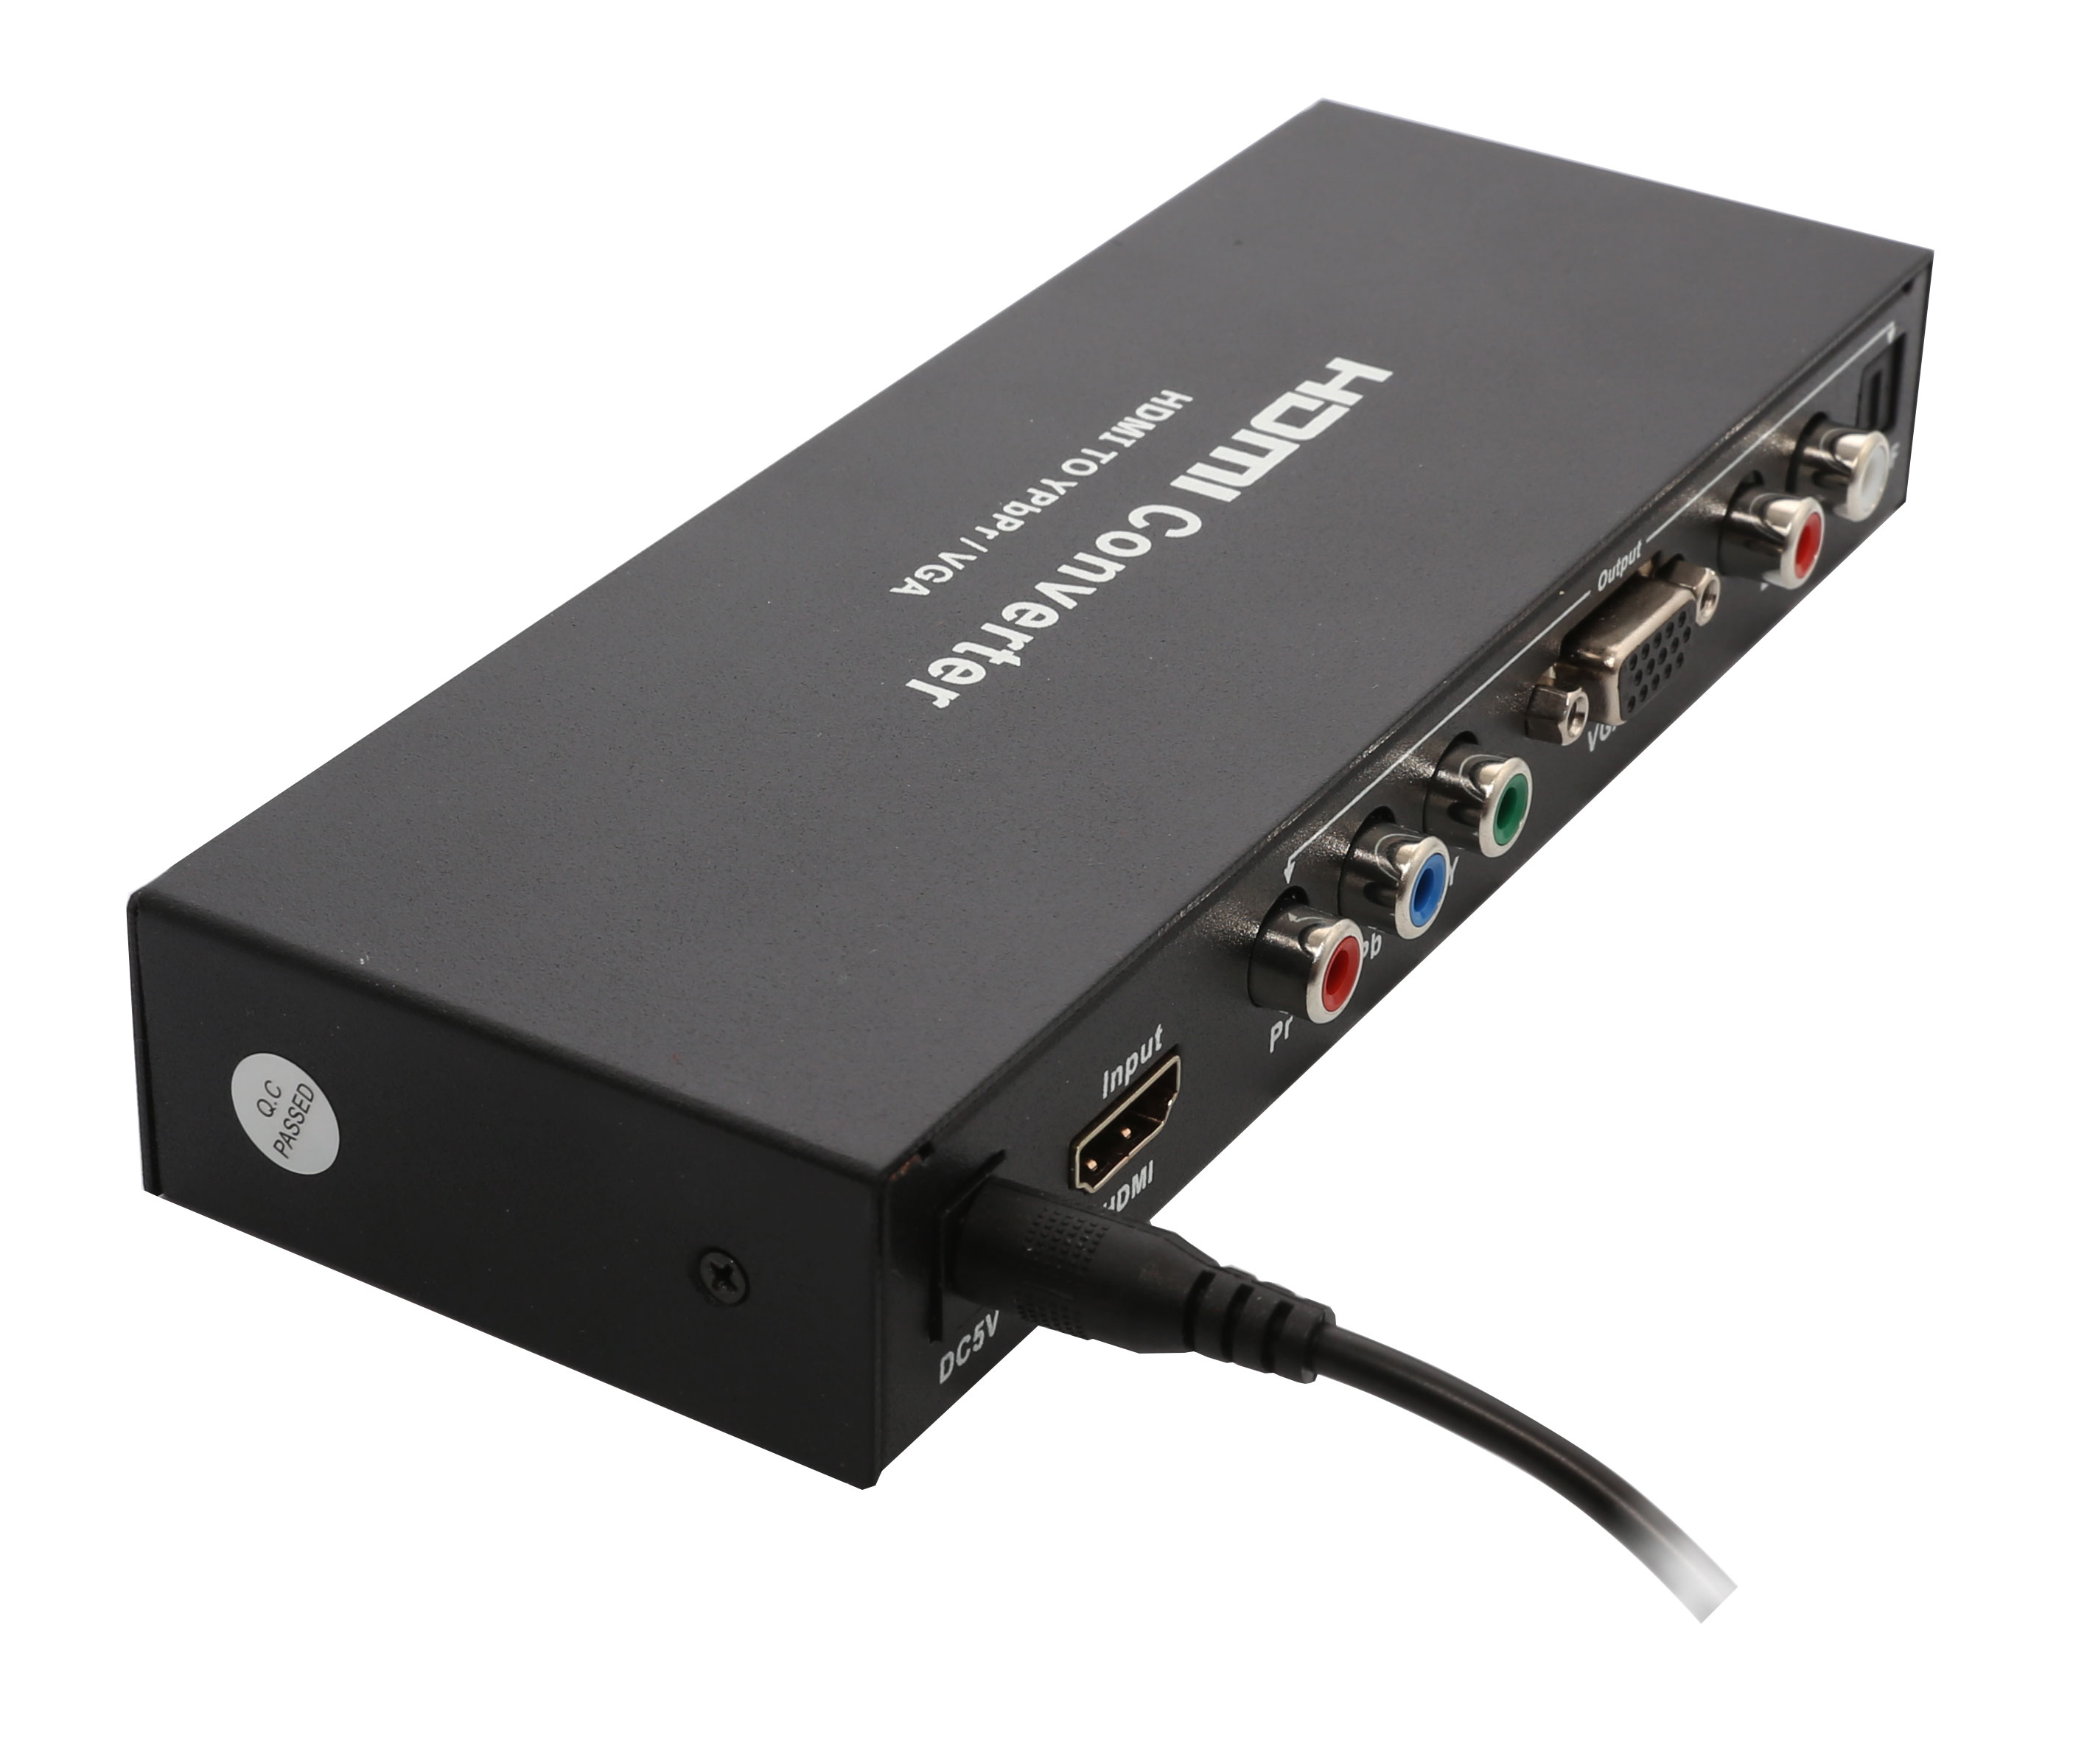 HDMI to VGA+YPbPr+Audio Converter, Input Signal Connection (HDMI), Output Signal Connections (YPbPr, VGA), Output Audio Connections (L/R Analog, SPDIF), Video Output up to 1080p, Black Color - image 4 of 5